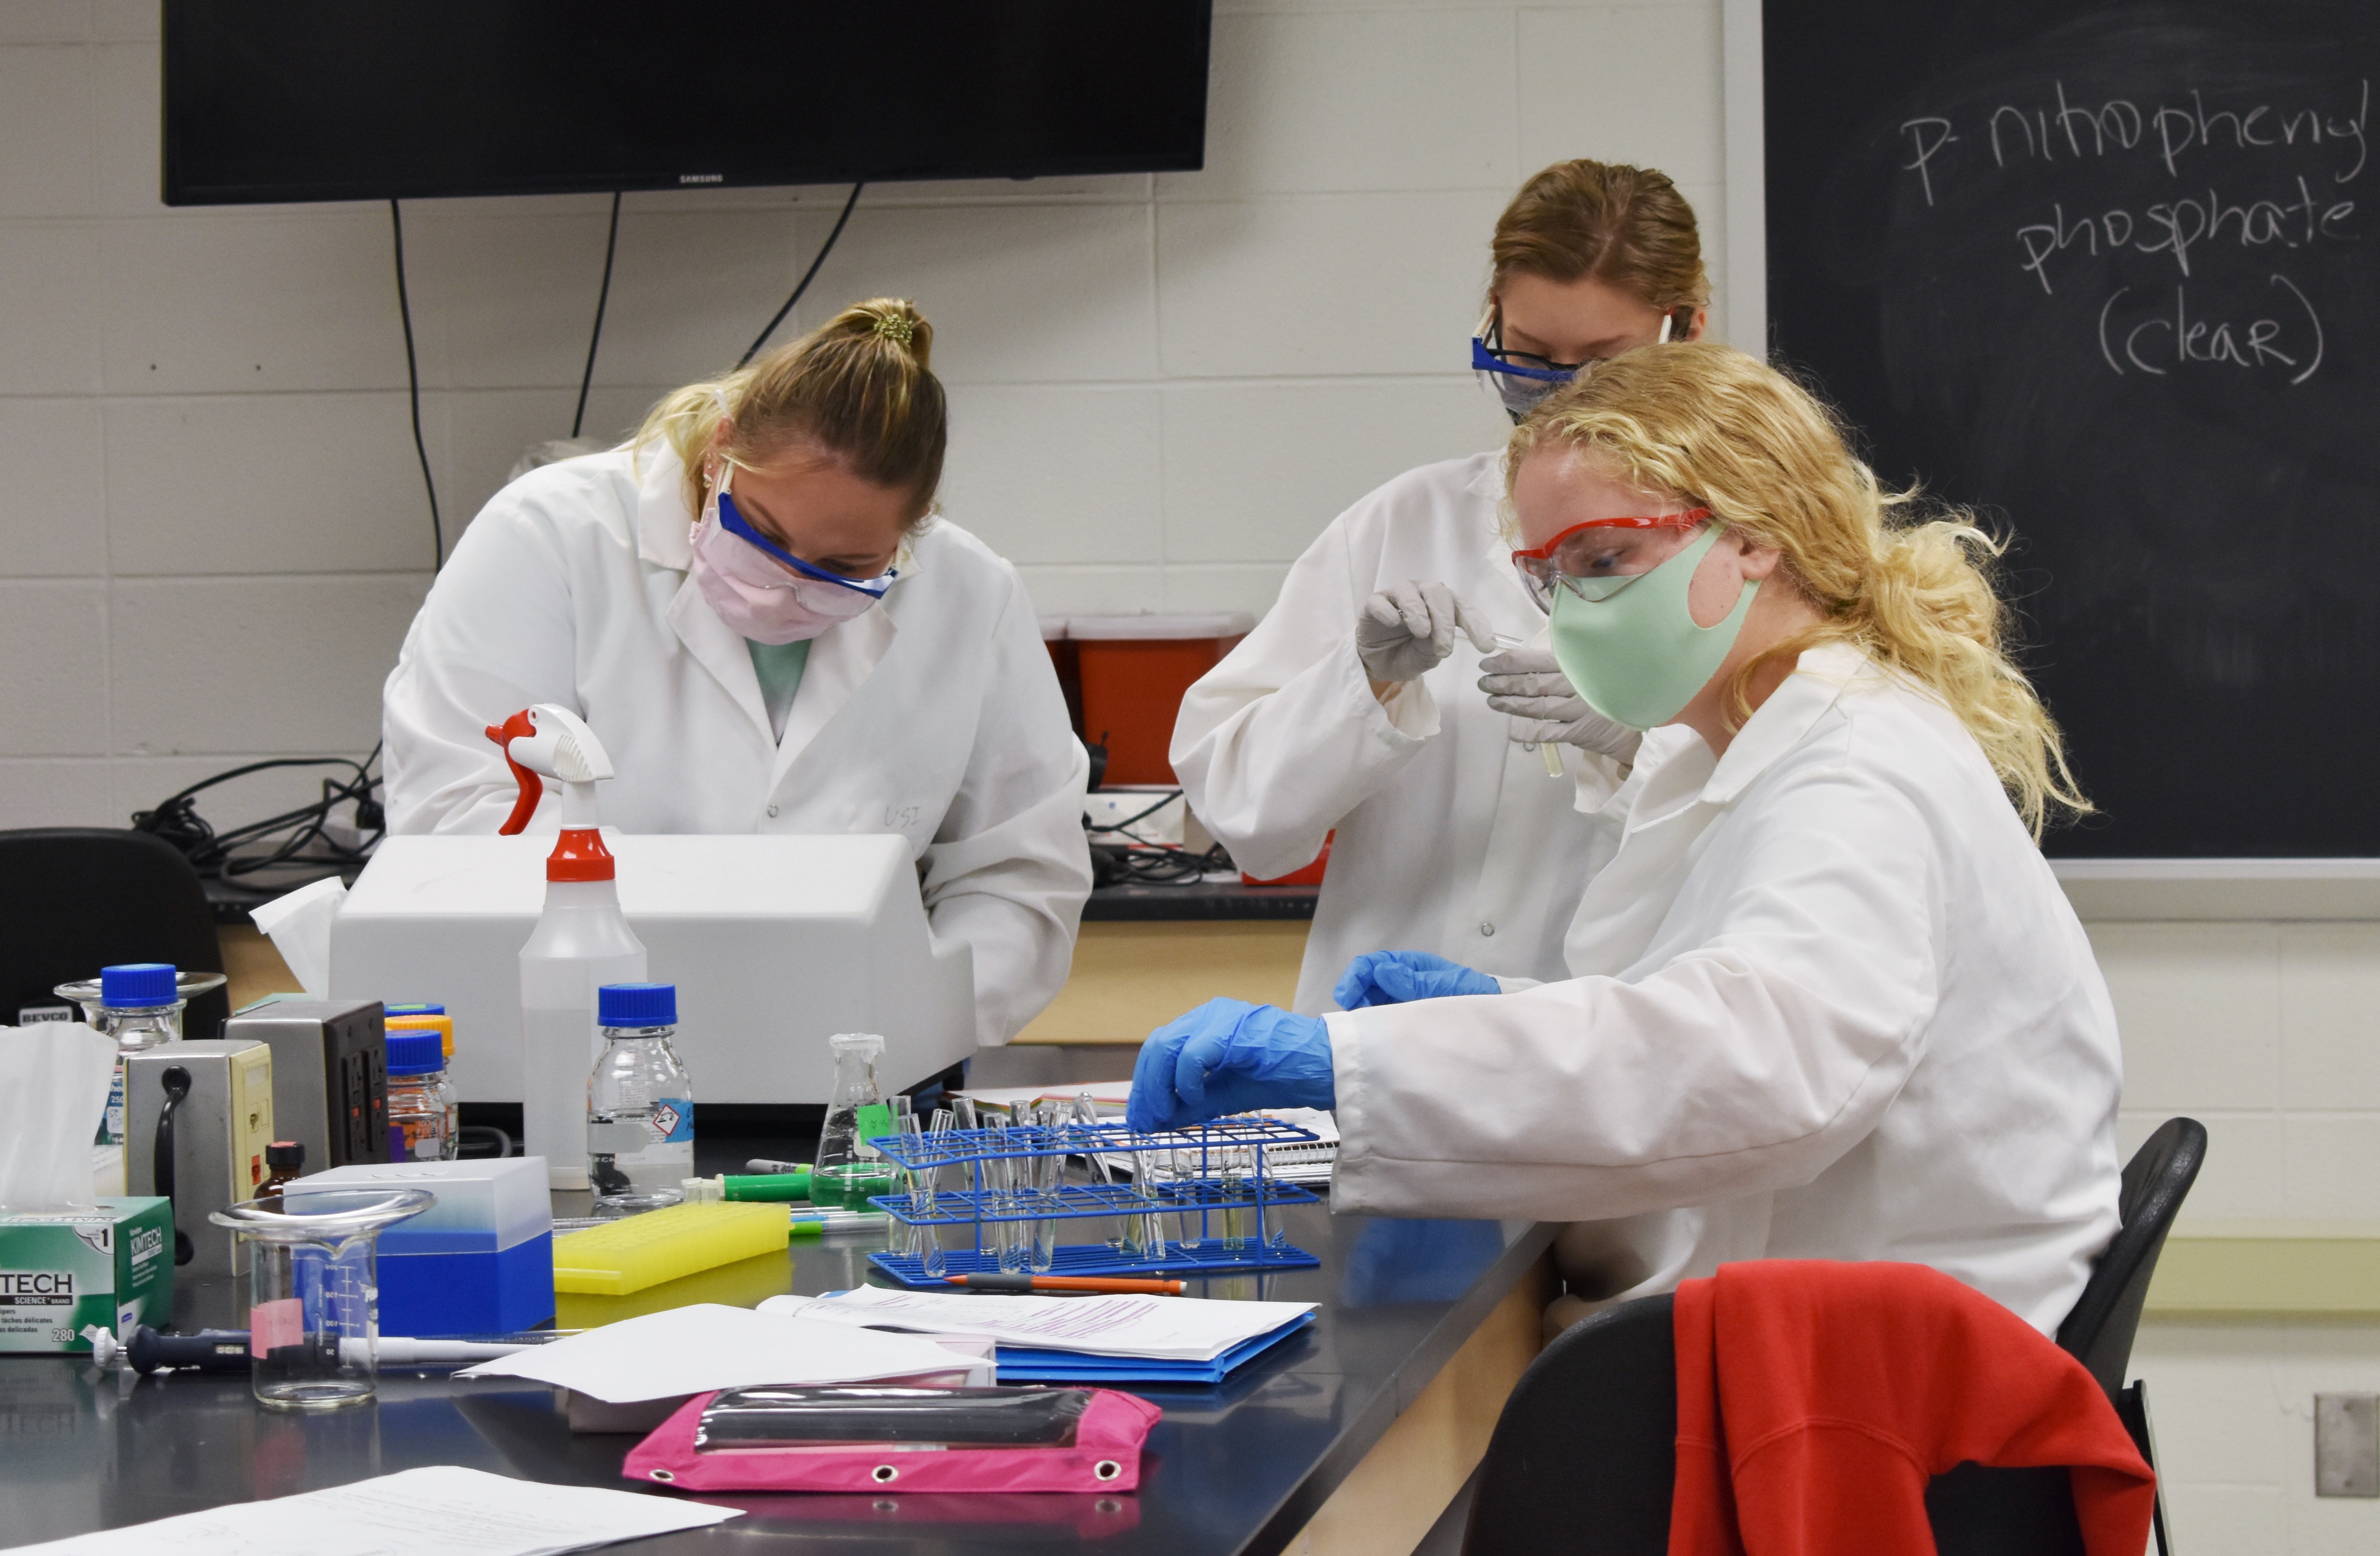 Introductory Biology Students in lab coats and goggles use a spectrophotometer to measure the optical density of samples.